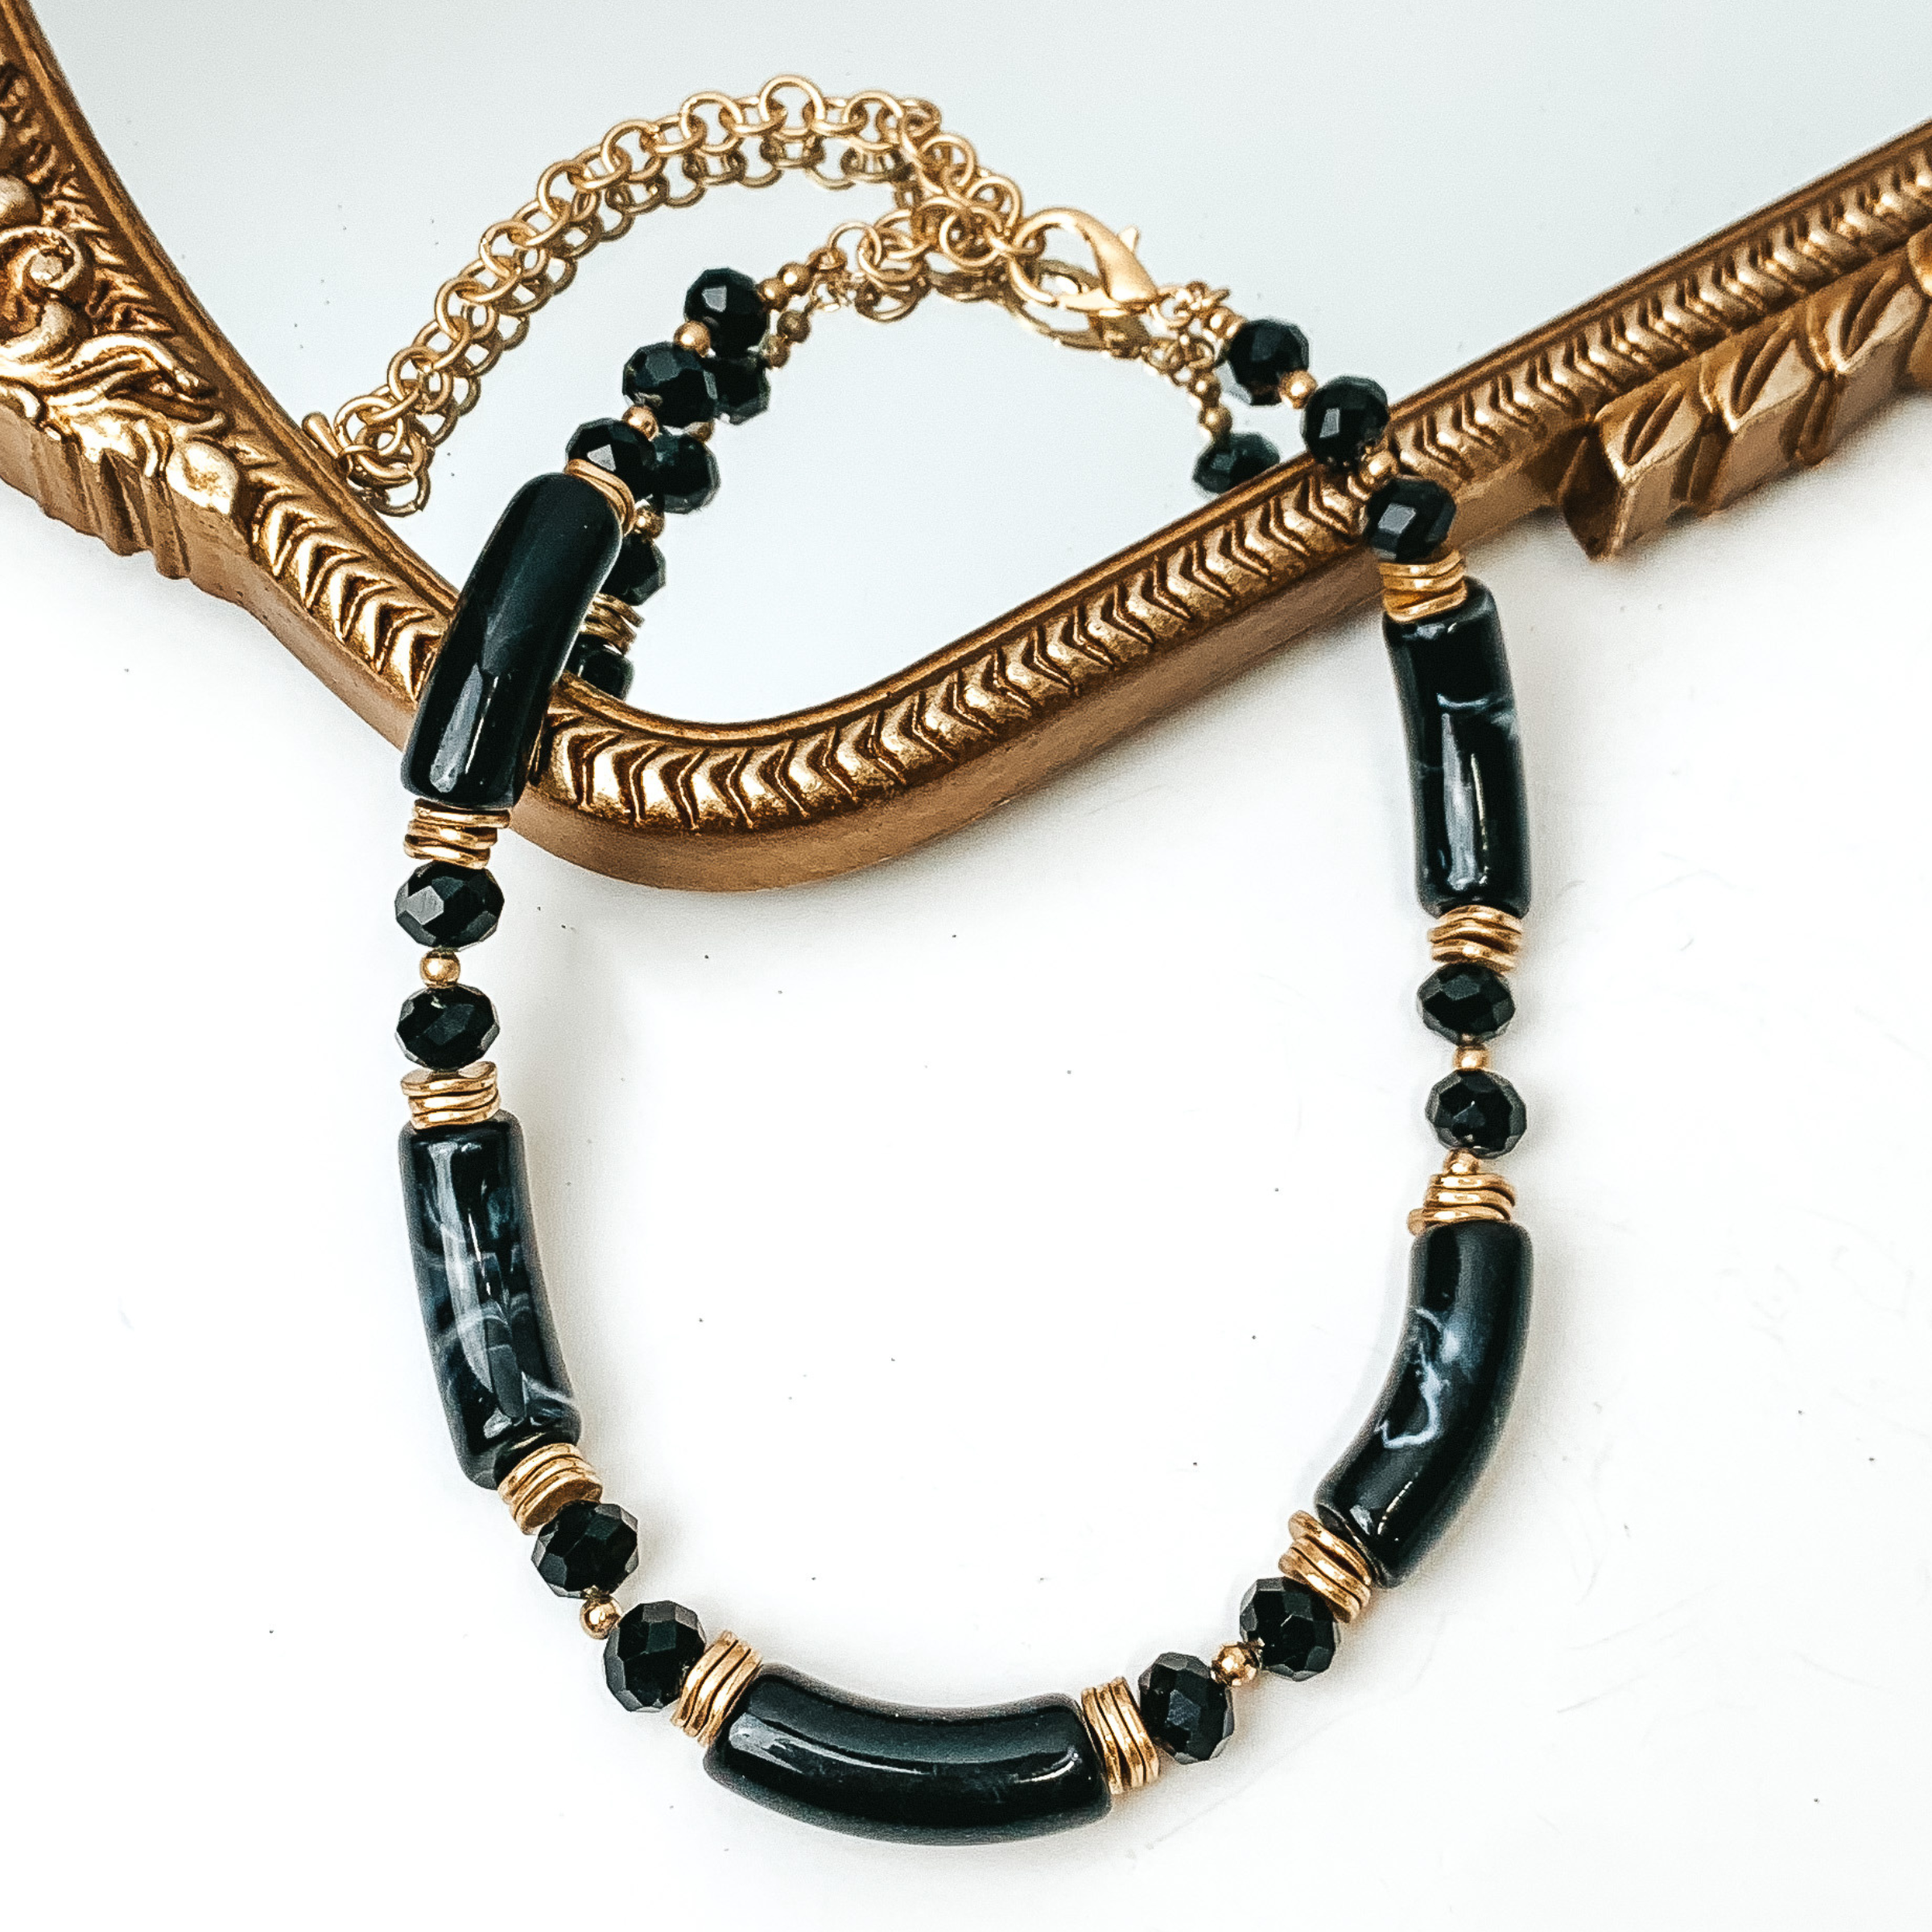 Black marble tube necklae with black crystal beads and gold bead spacers. This necklace is pictured partially laying on a gold mirror on a white background. 